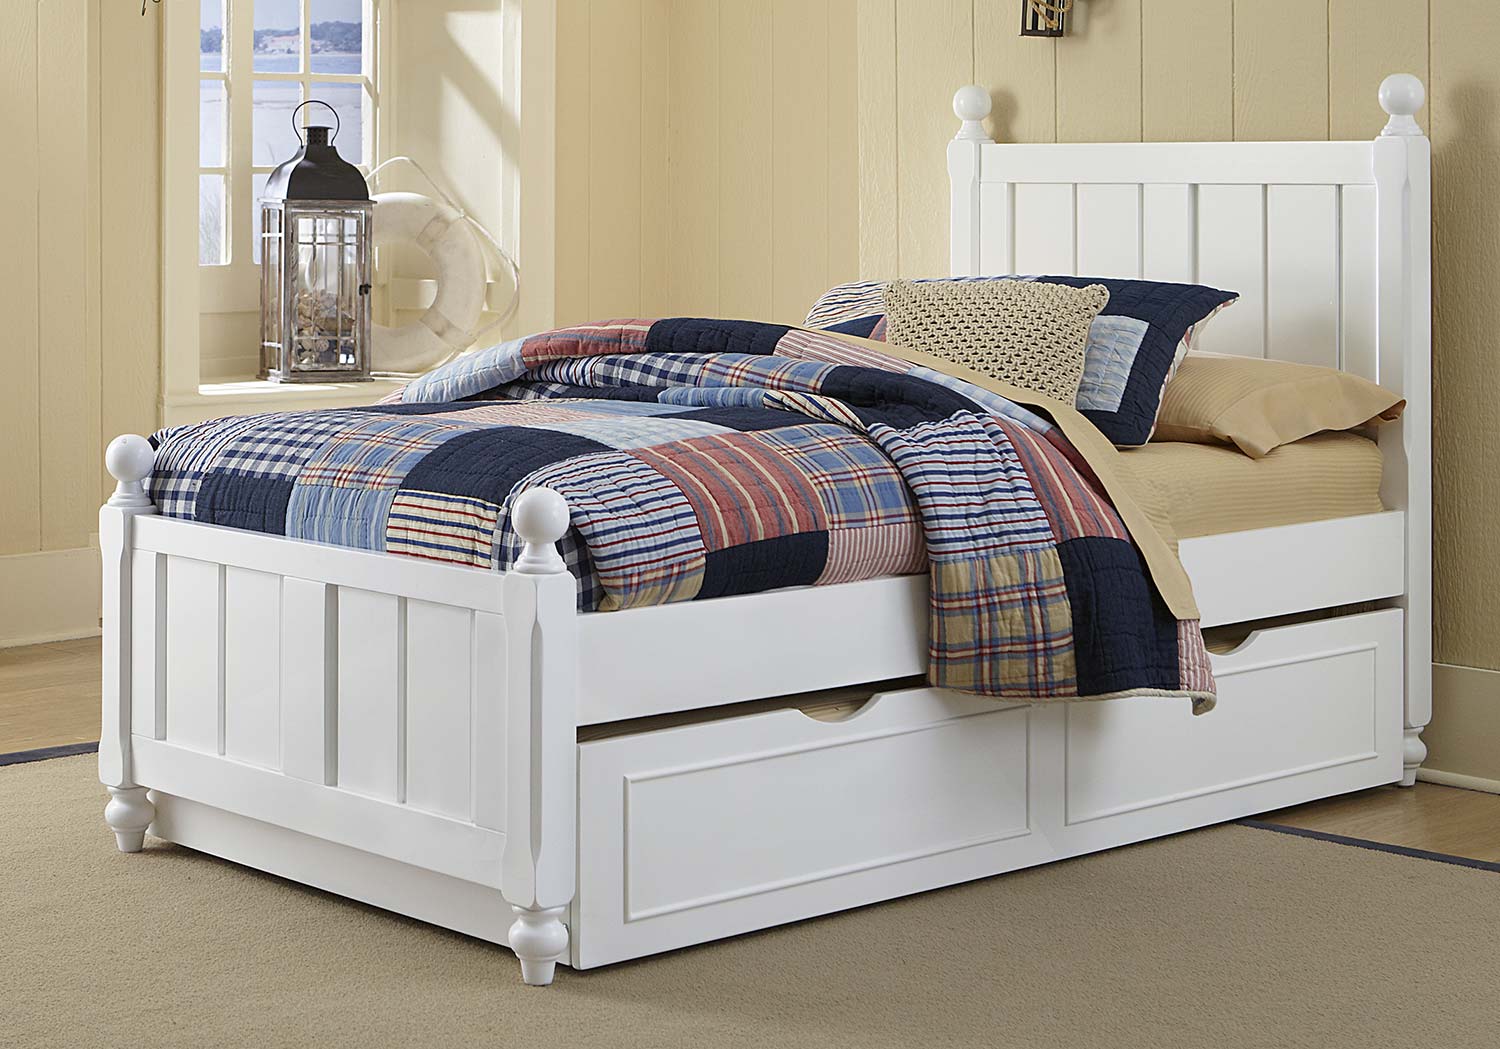 NE Kids Lake House Kennedy Bed With Trundle - White